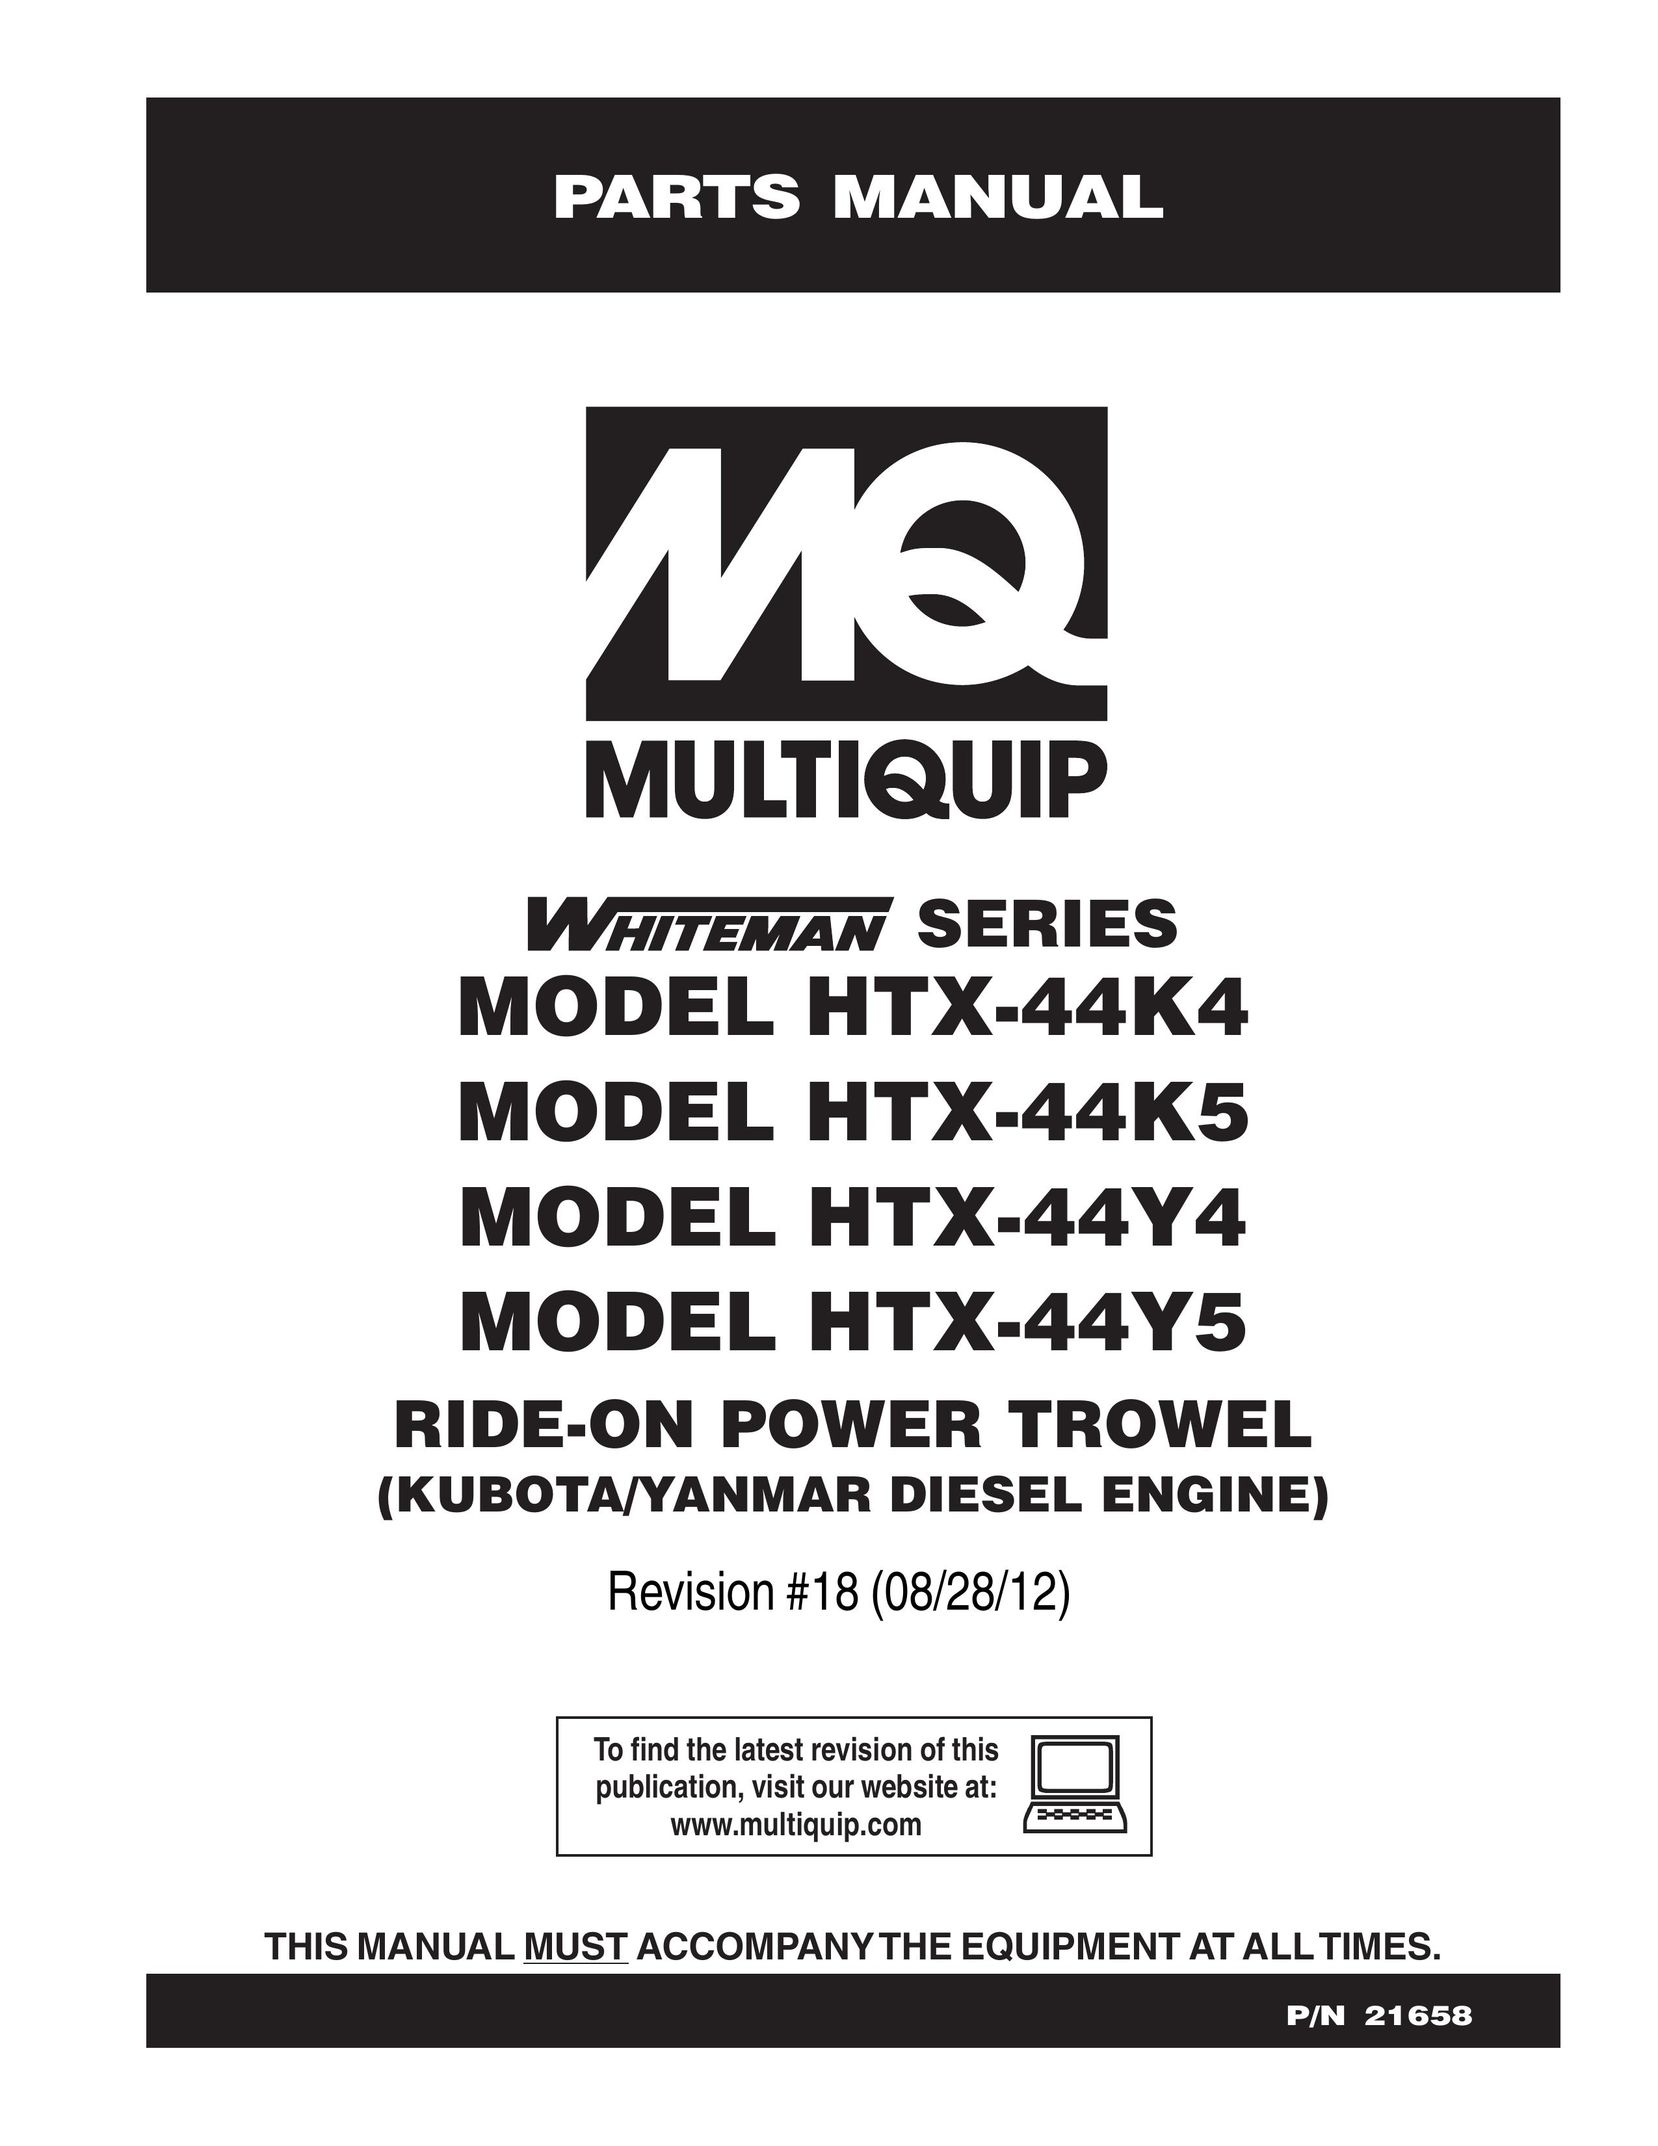 Multiquip HTX-44K4 Riding Toy User Manual